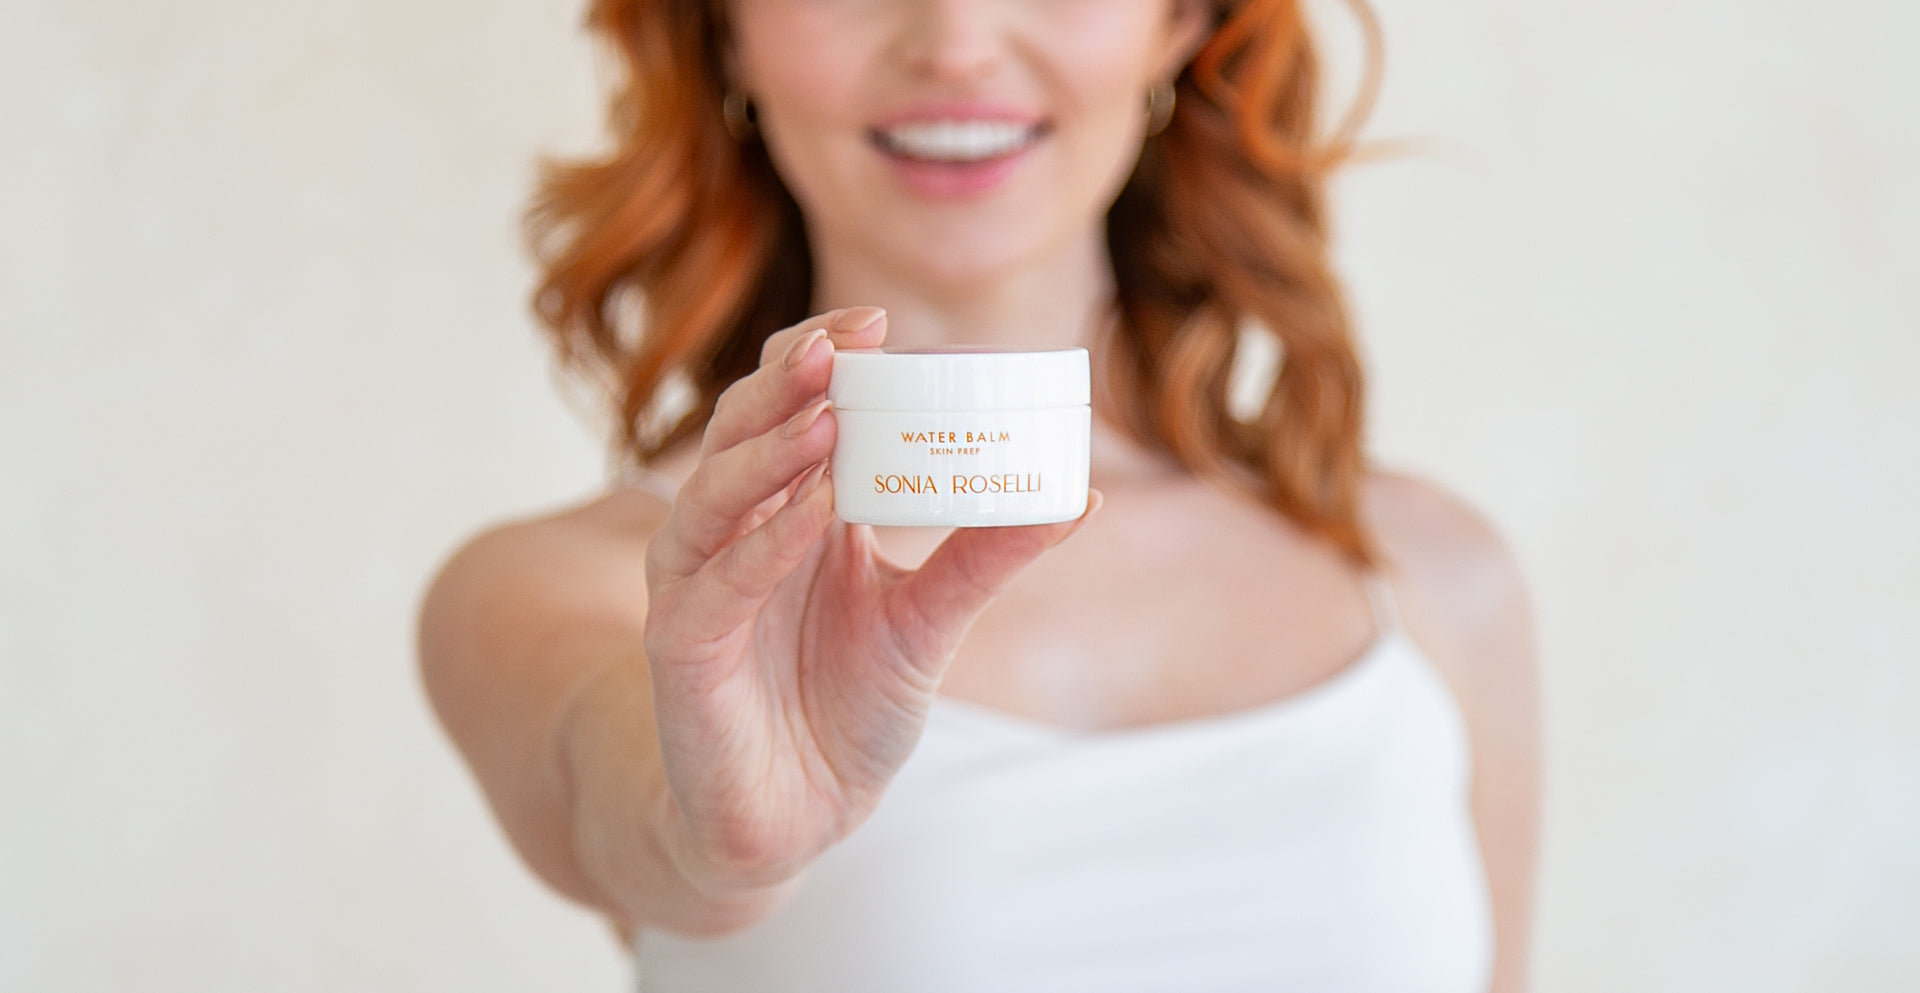 In a delightful moment captured, a joyful woman holds a jar of Sonia Roselli Beauty's Water Balm moisturizer, her radiant smile reflecting the satisfaction and confidence that comes from using this hydrating skincare product, which promises soft and glowing skin.